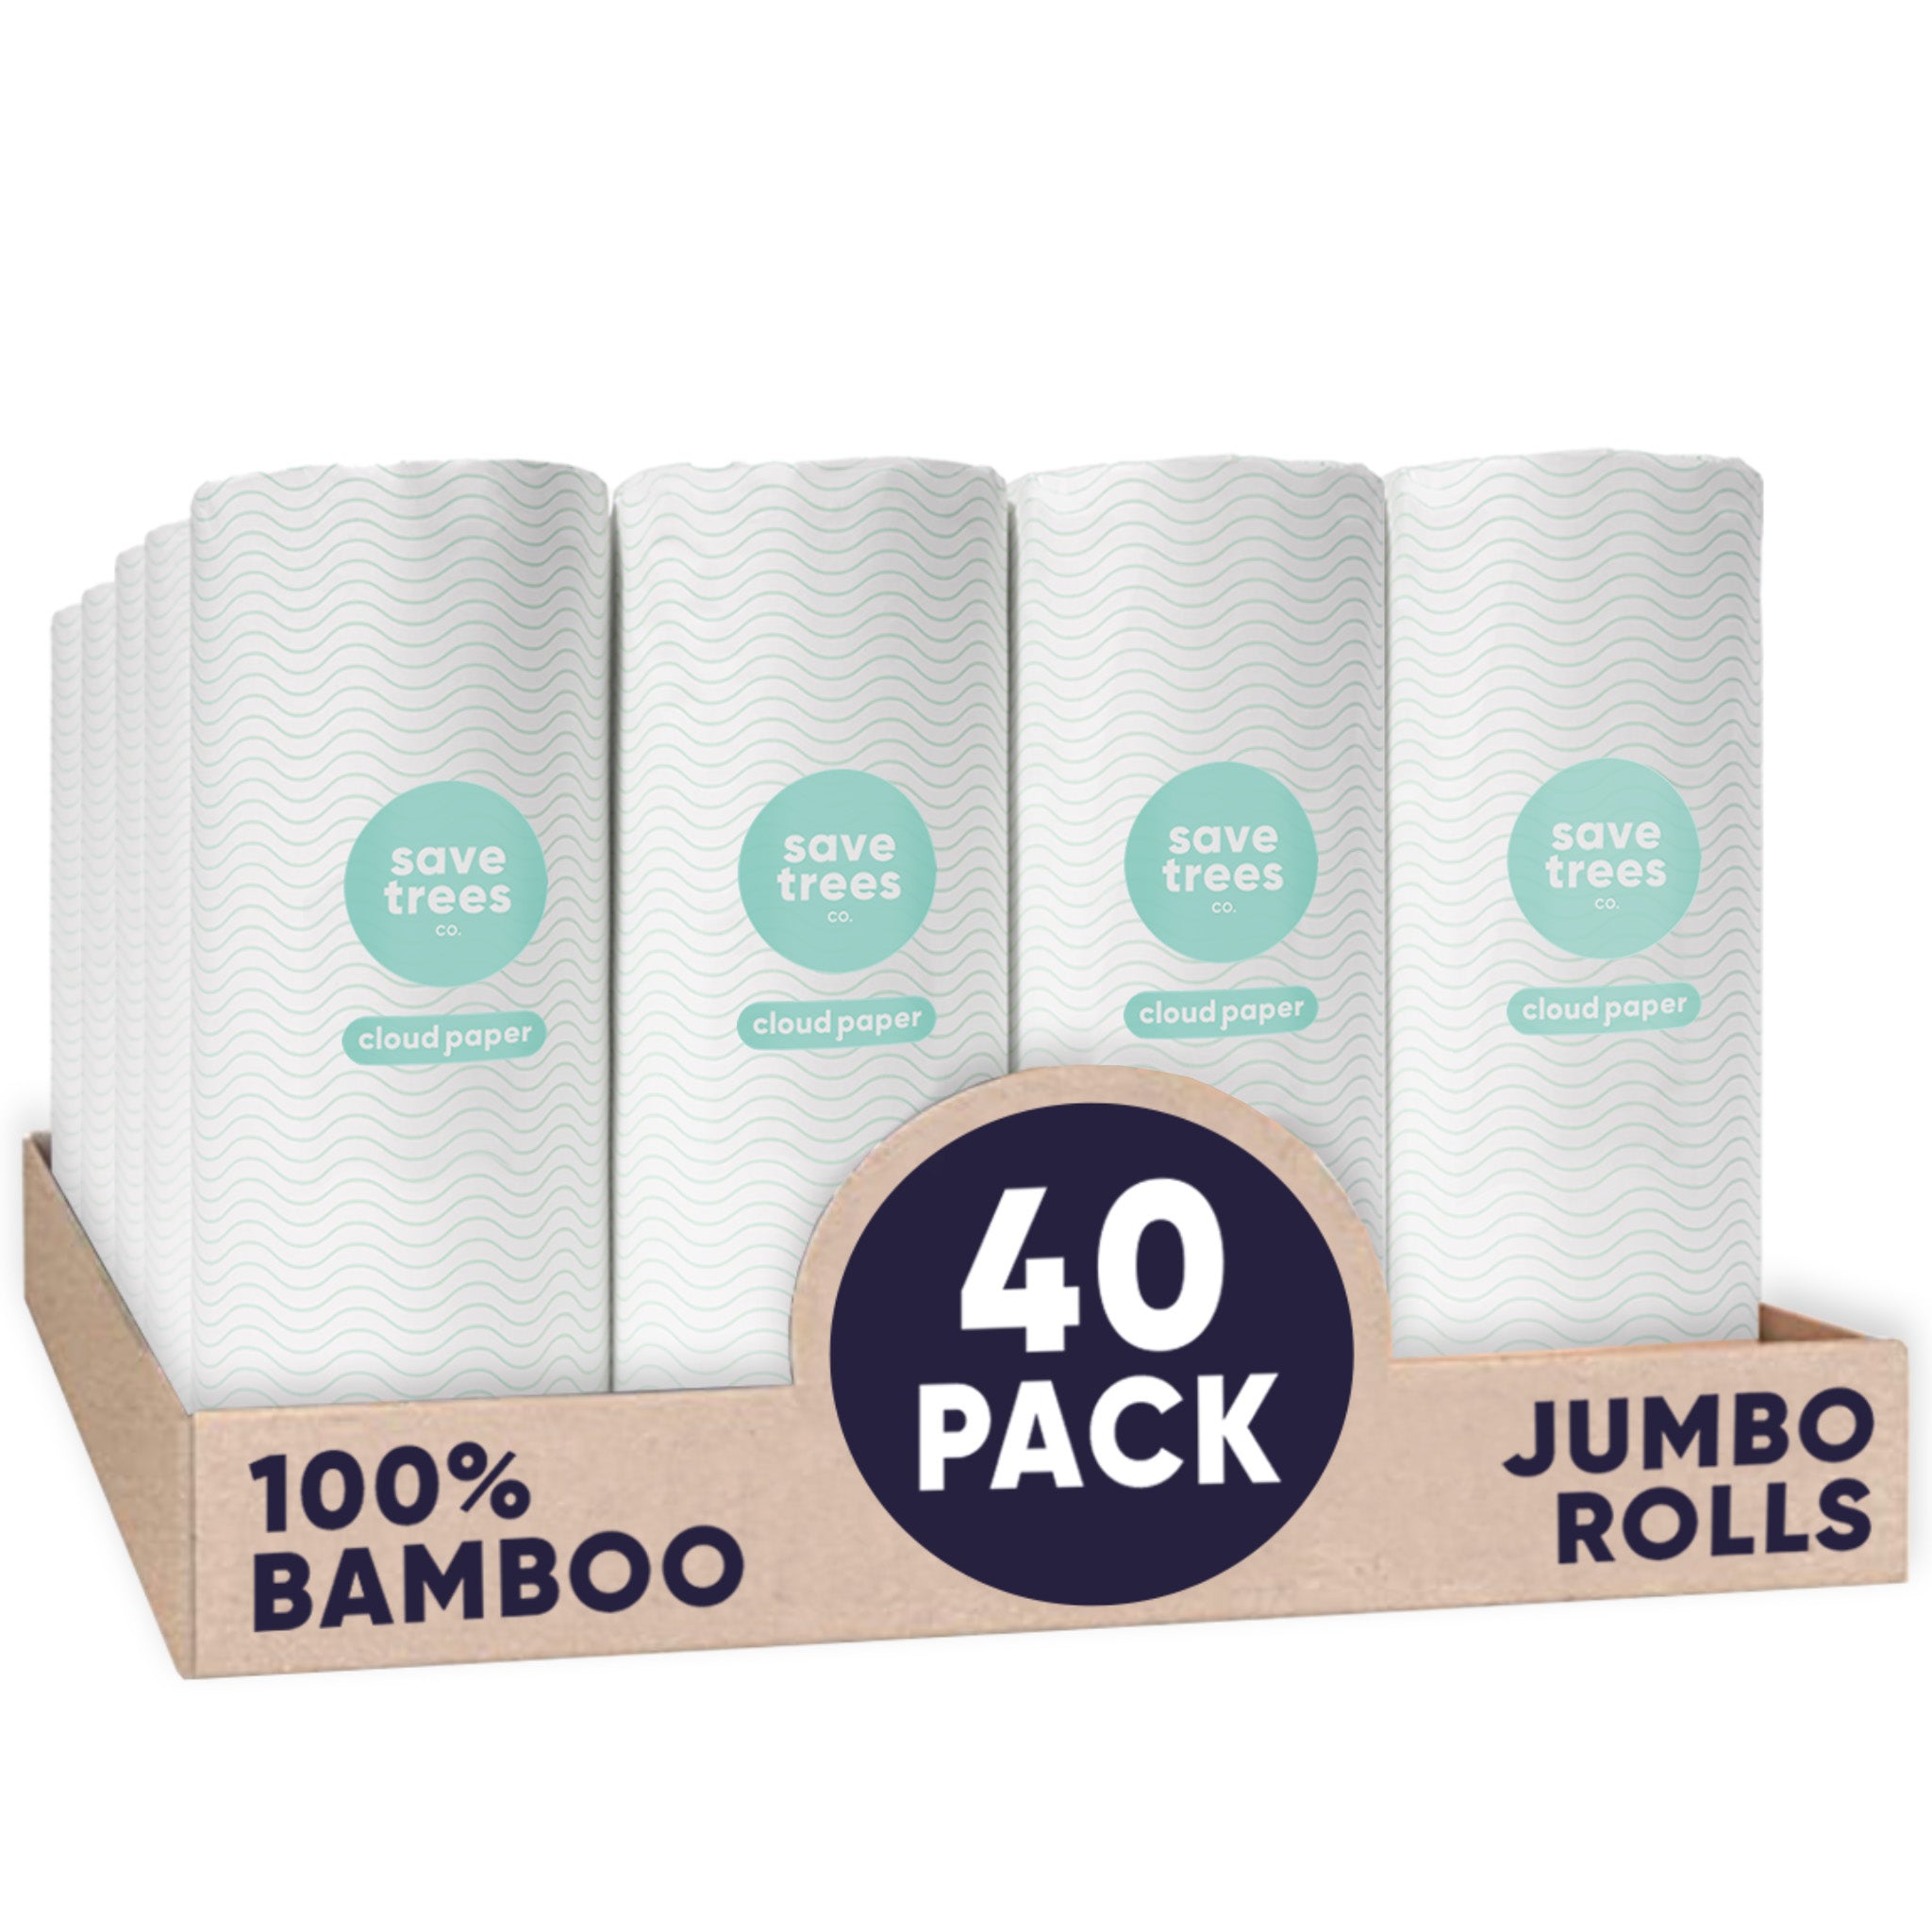 Buy reusable tissue 1 roll x 50 tissues - all-purpose disposable